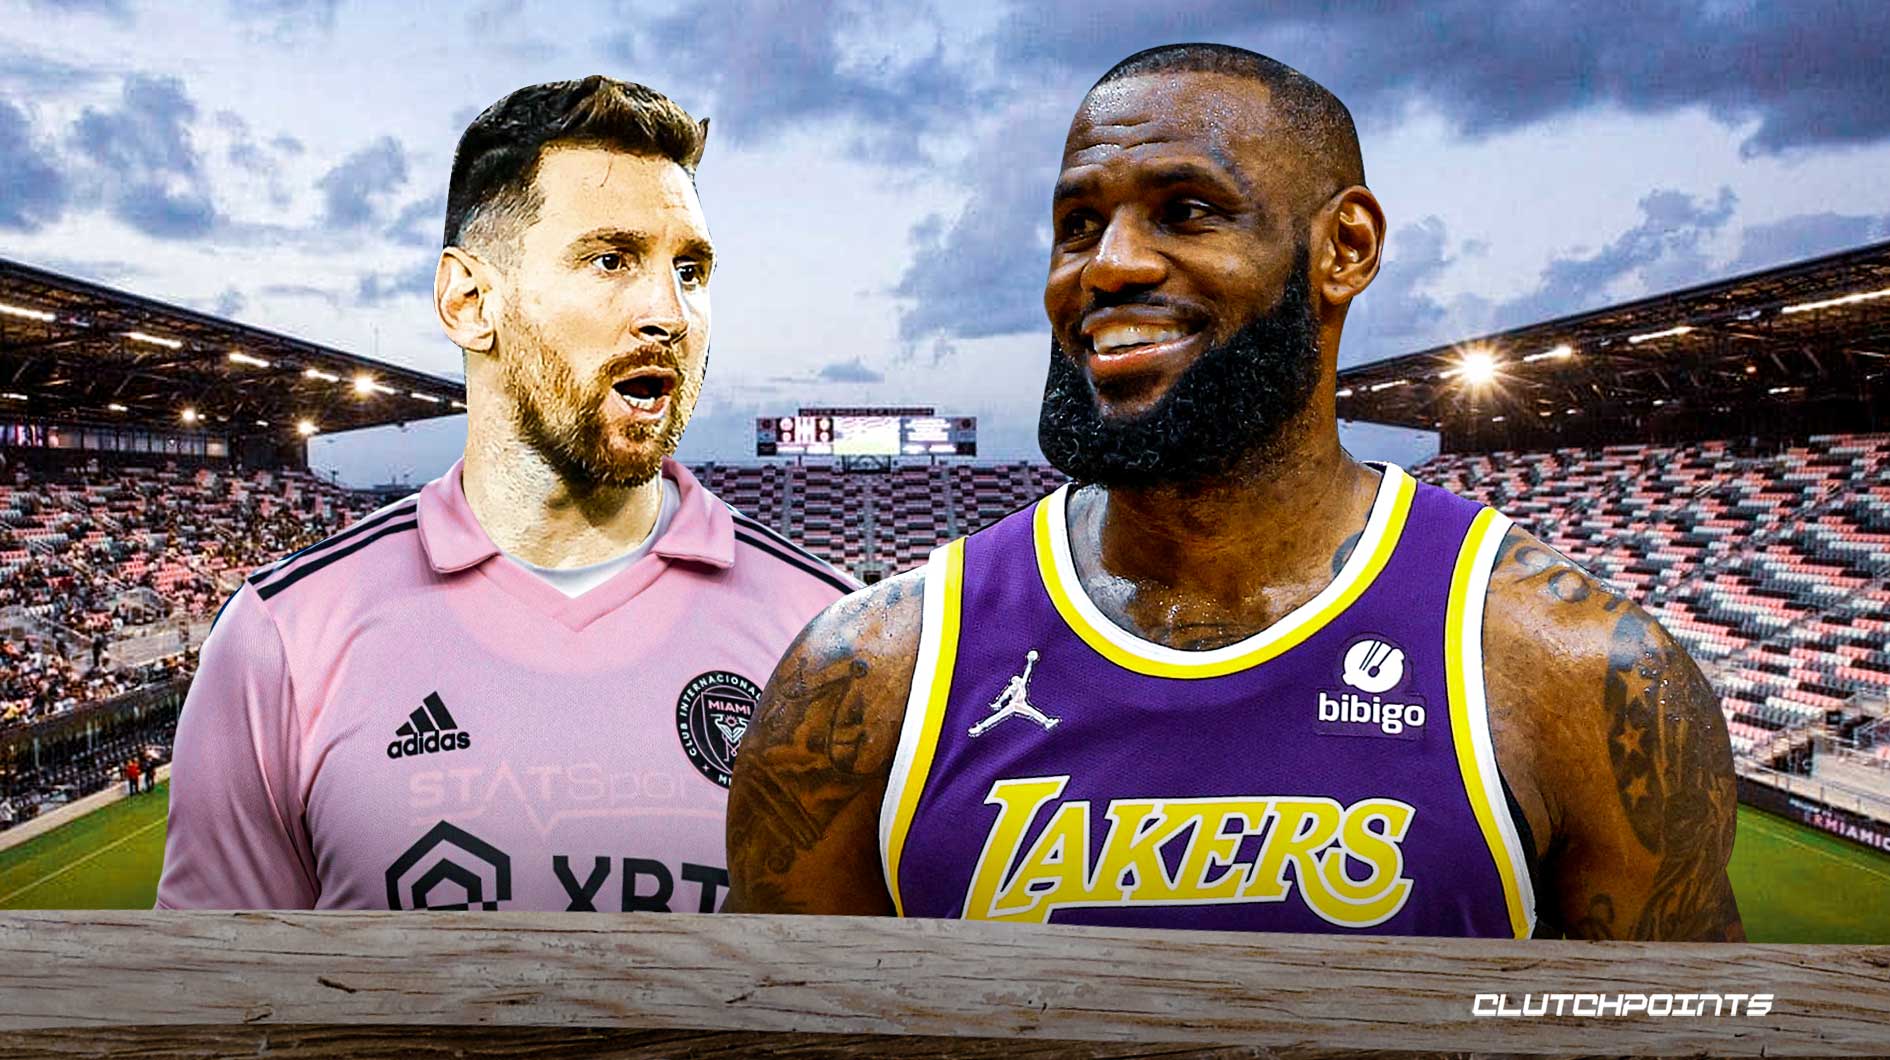 Lionel Messi debut will see LeBron James in Inter Miami crowd